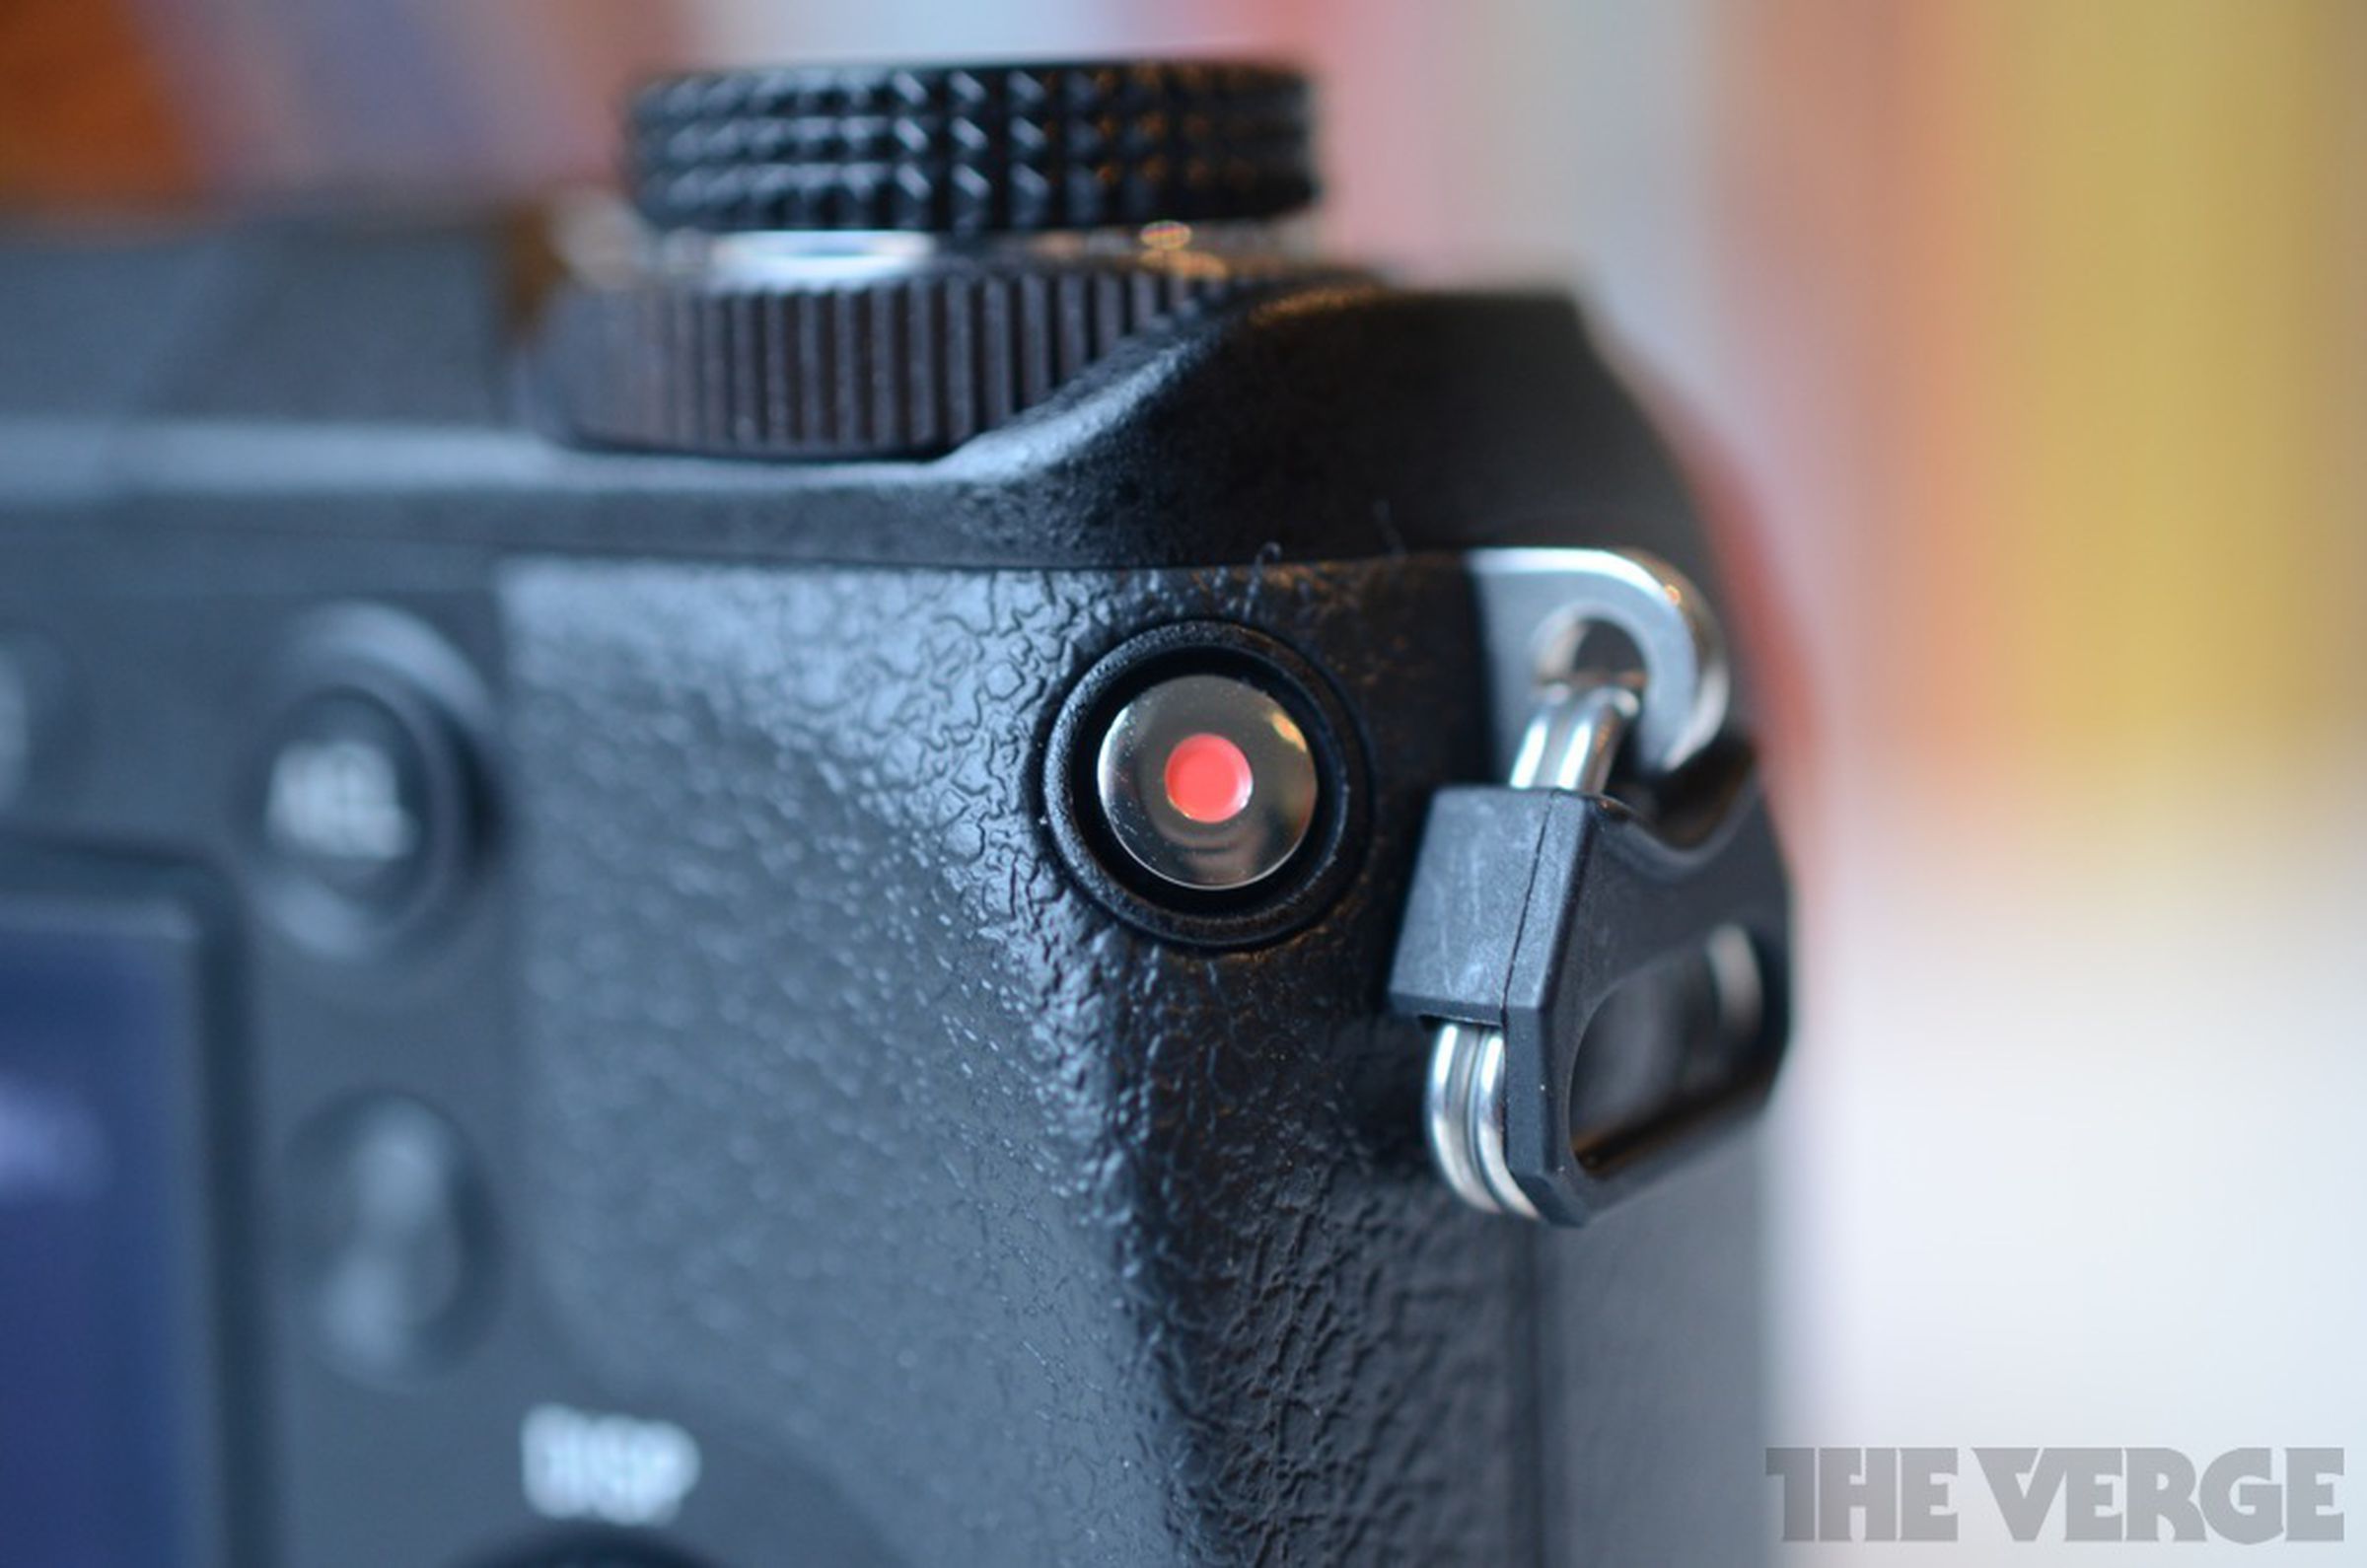 Sony NEX-6 hands-on pictures